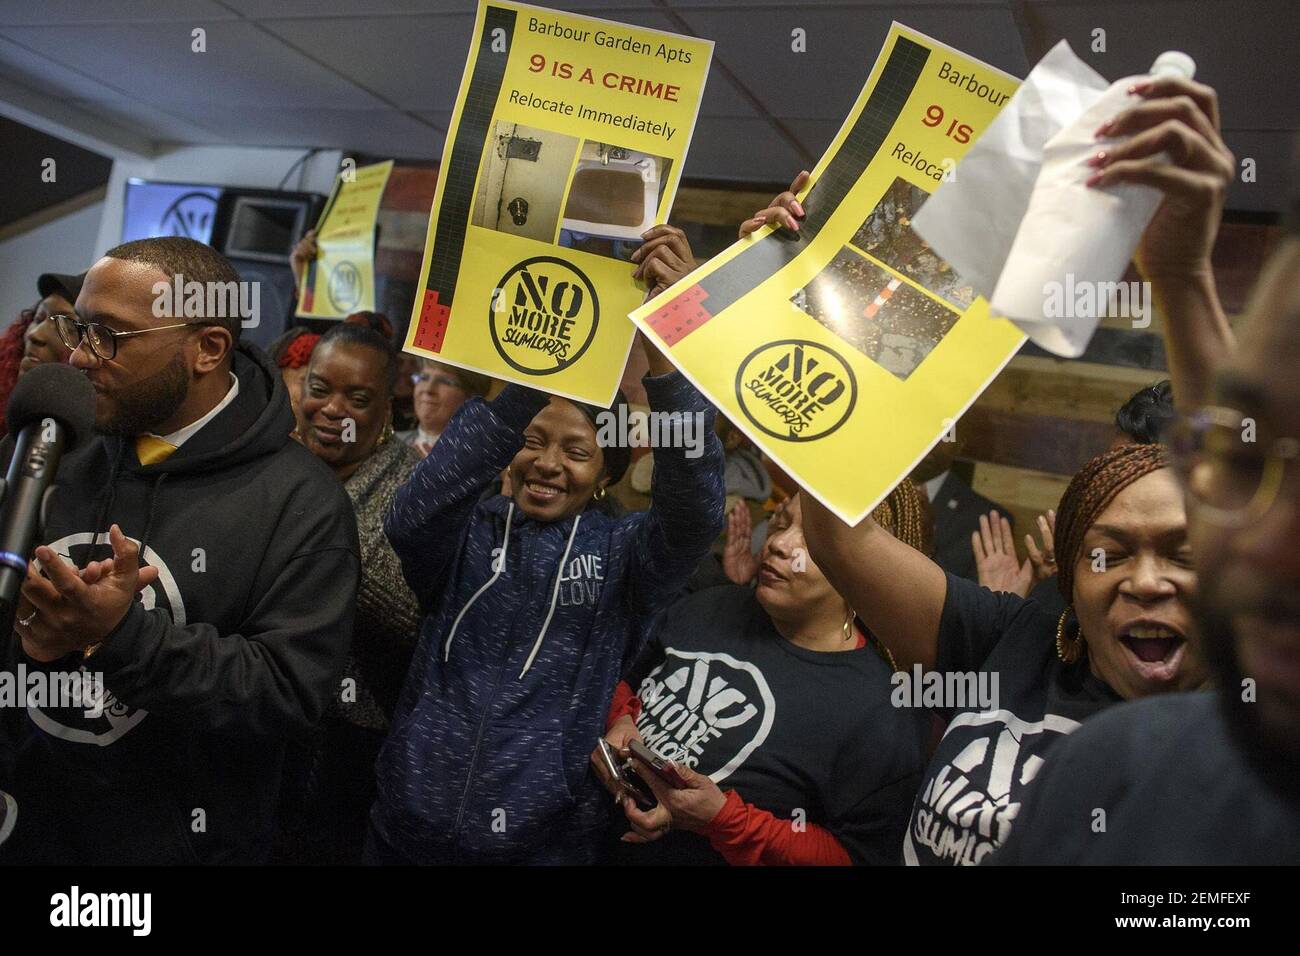 The Rev. A.J. Johnson, left, and residents of Barbour Gardens chant 'No more slum lords,' while meeting with the press on Feb. 14, 2019 to highlight HUD's announcement that the residents are to be relocated. (Photo by Mark Mirko/Hartford Courant/TNS/Sipa USA) Stock Photo